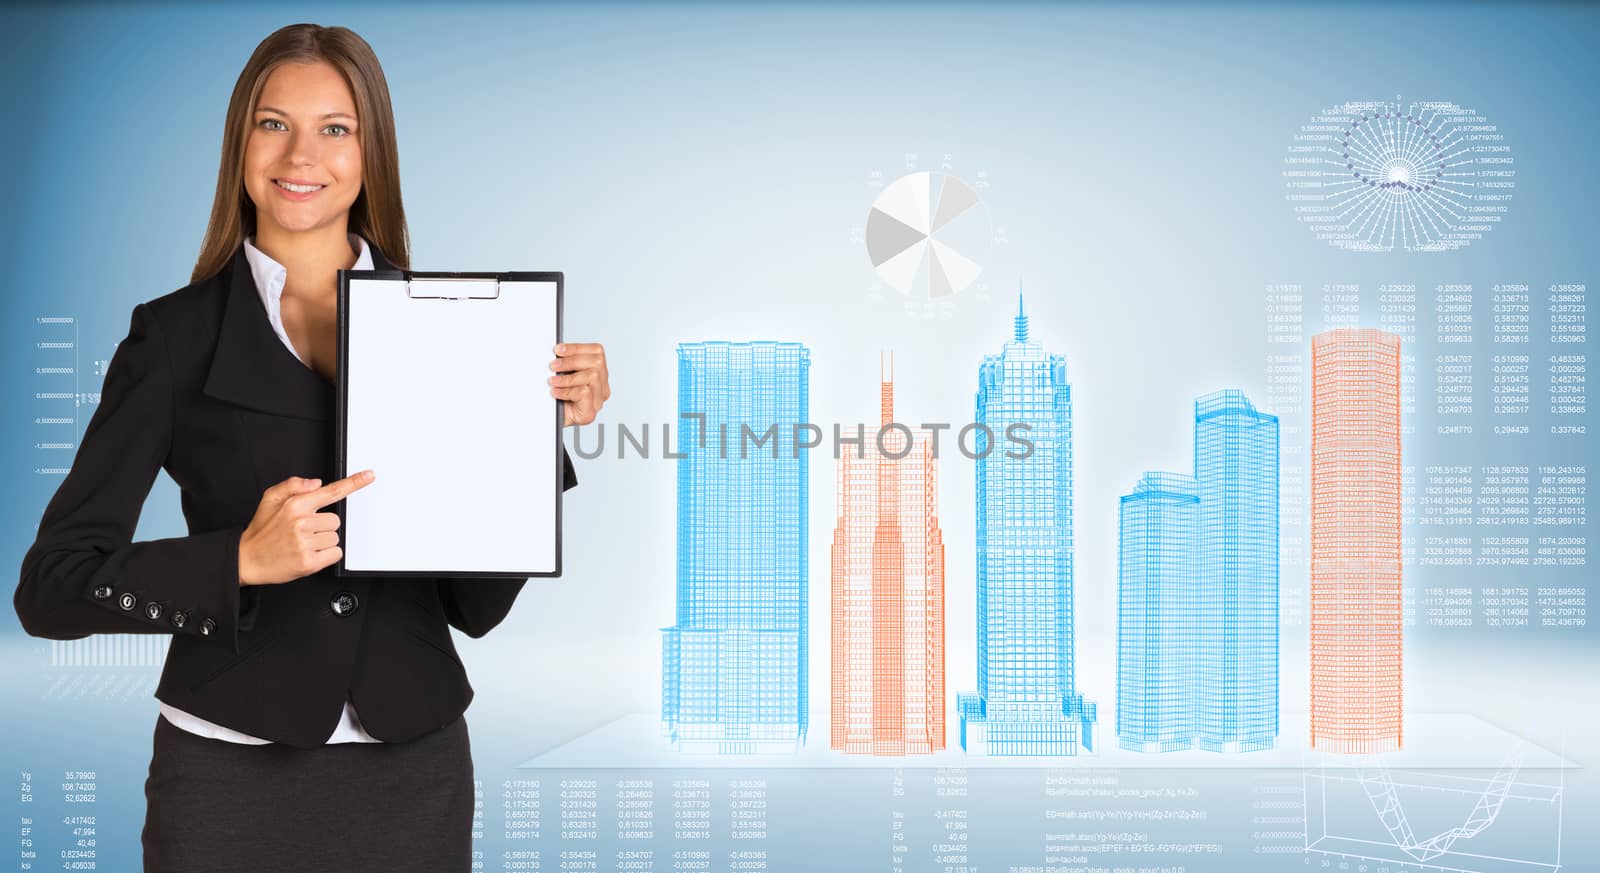 Businesswoman holding paper holder. High-tech wire frame skyscrapers and graphs as backdrop